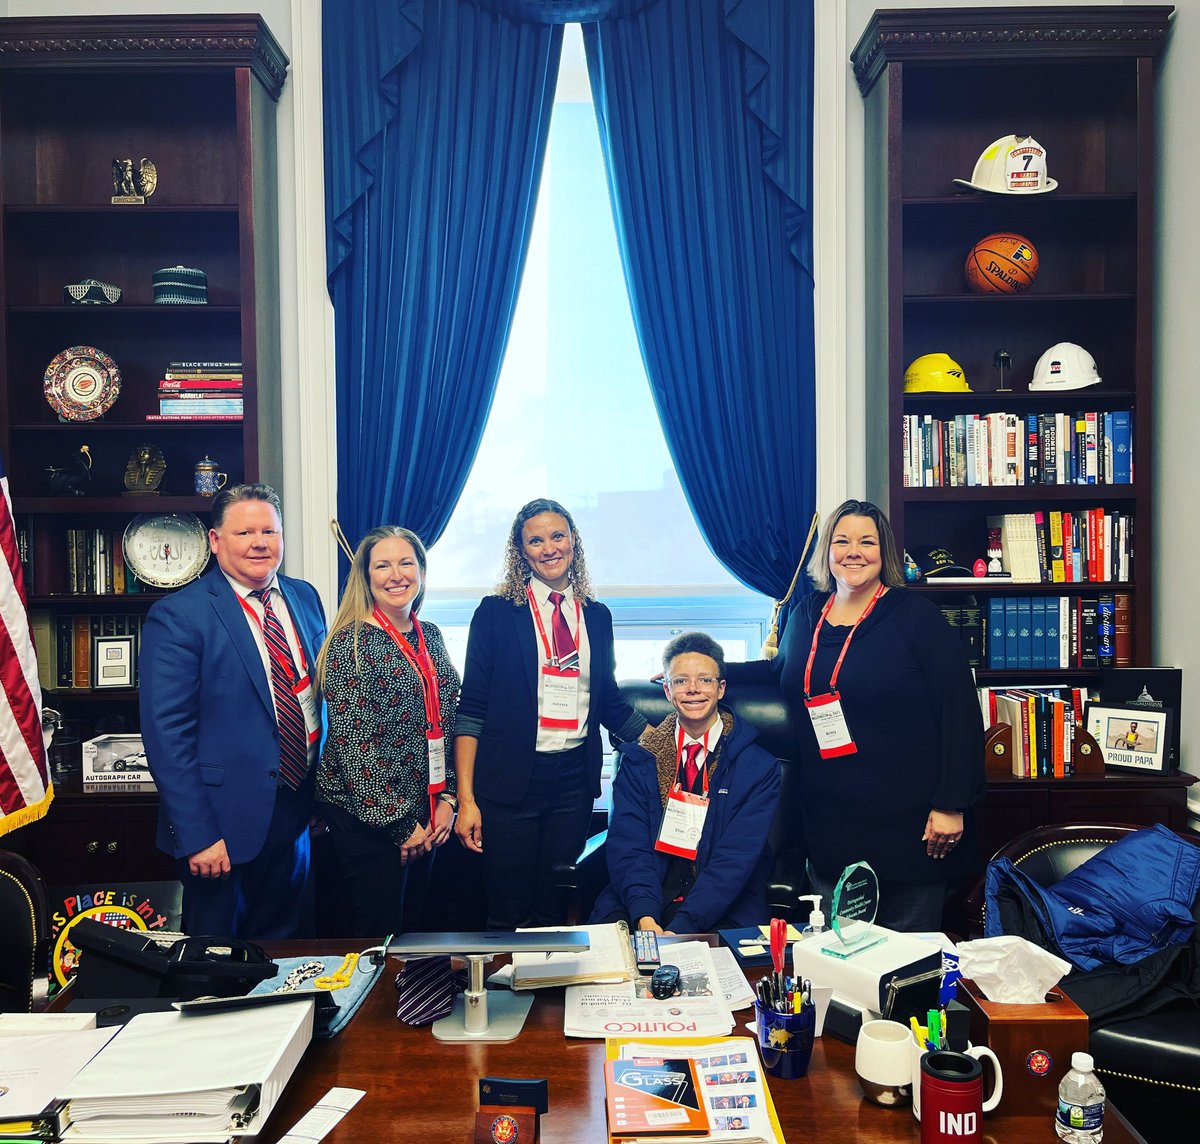 Thank you to the wonderful staff @RepAndreCarson for supporting federal funding for hemophilia treatment centers and H.R. 830!! #NHFWD @NHF_Hemophilia @HemoIndy